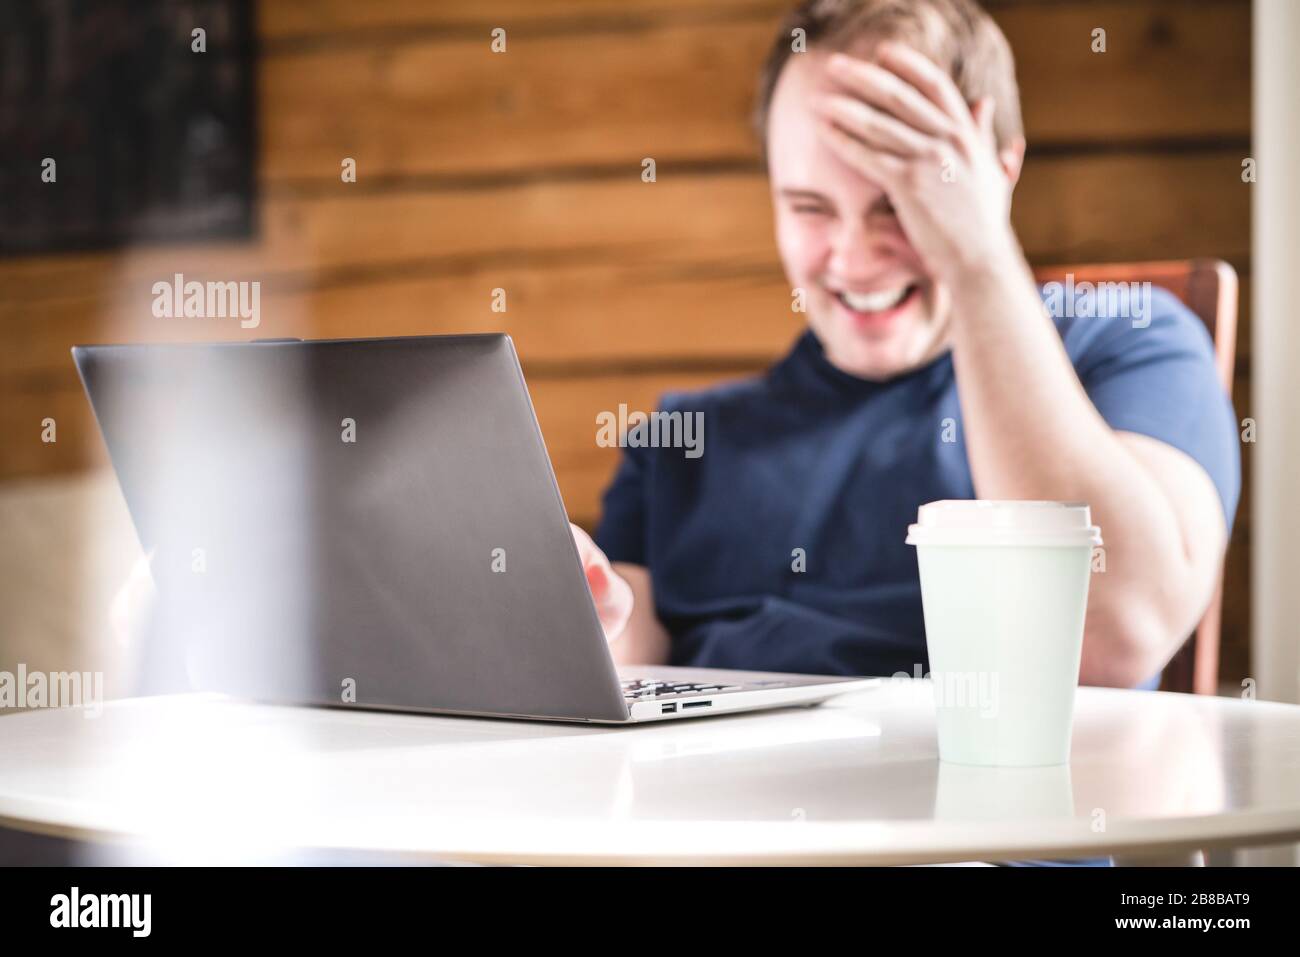 Man laughing while using laptop. Happy smiling guy with computer in cafe, coffee shop or home. Joy of life, happiness. Watching funny videos or stream. Stock Photo